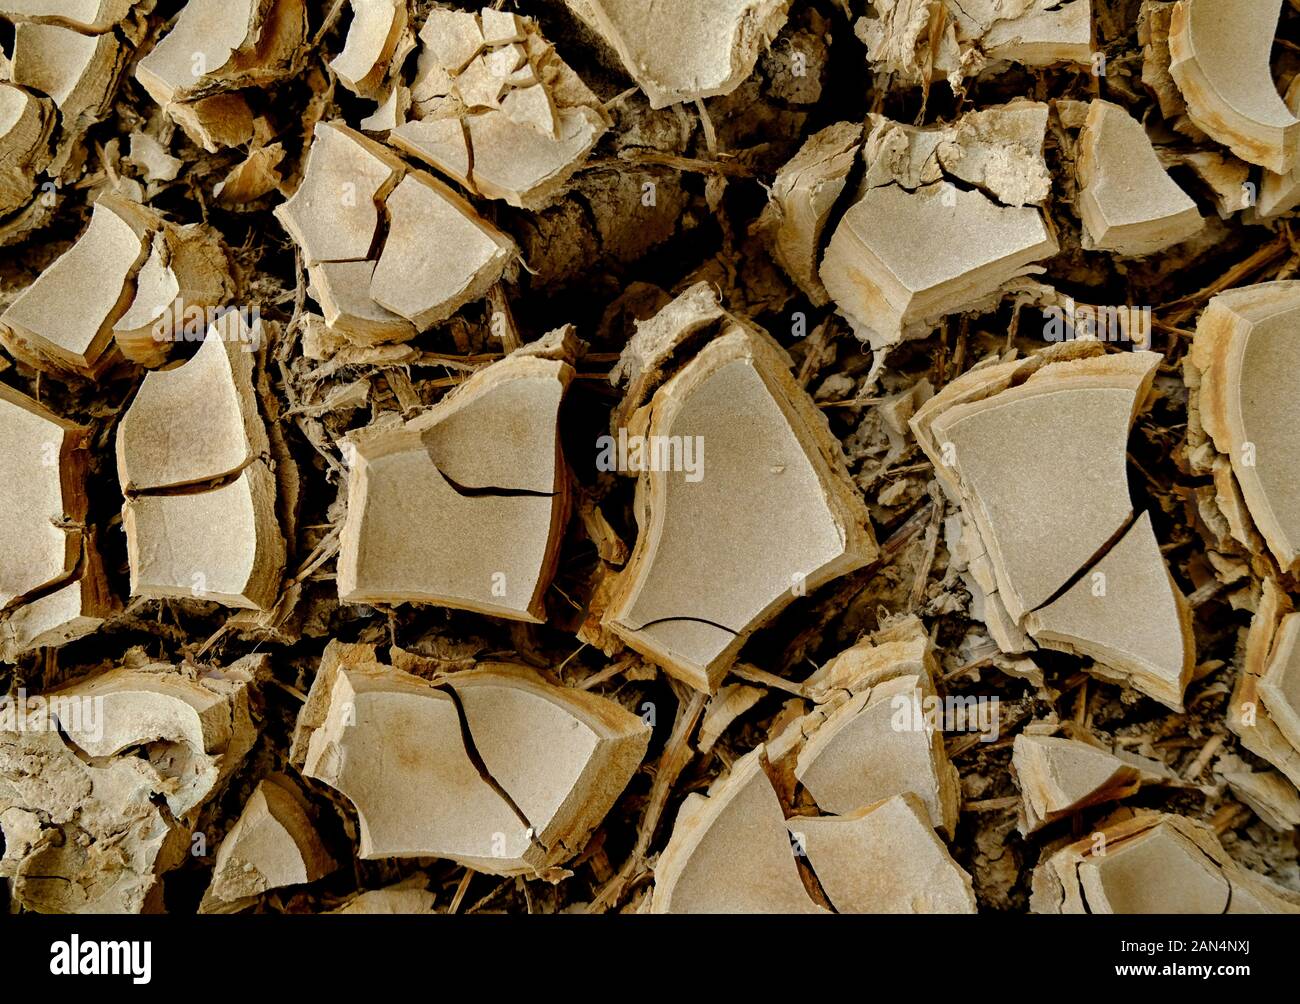 Cracked earth surface made of light brown soil material, close detailed view. Stock Photo